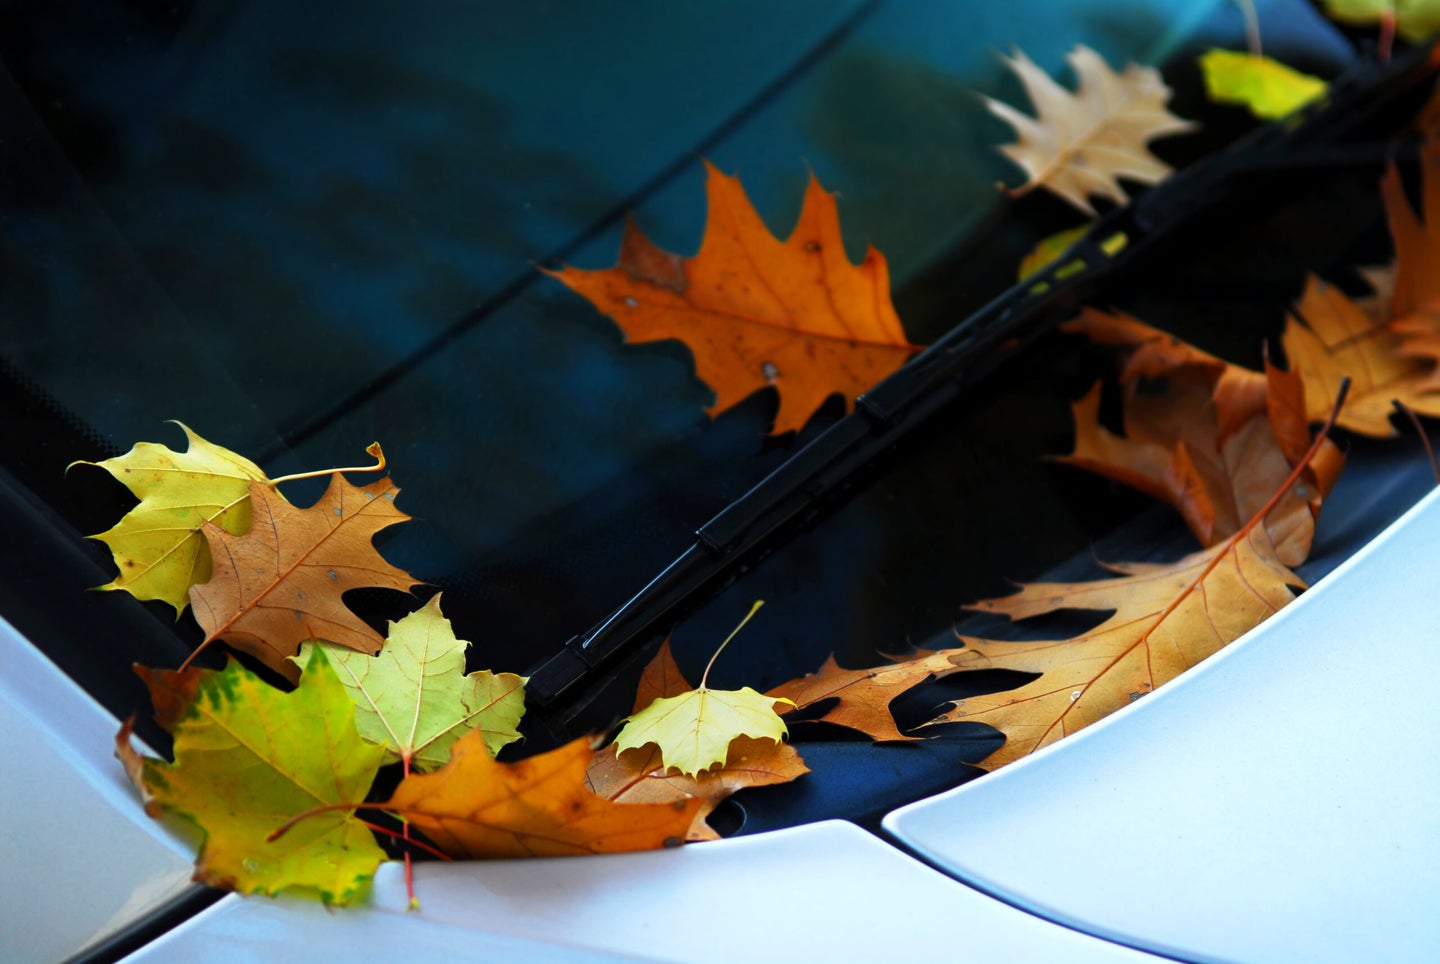 Fallen autumn leaves on the windshield of a car